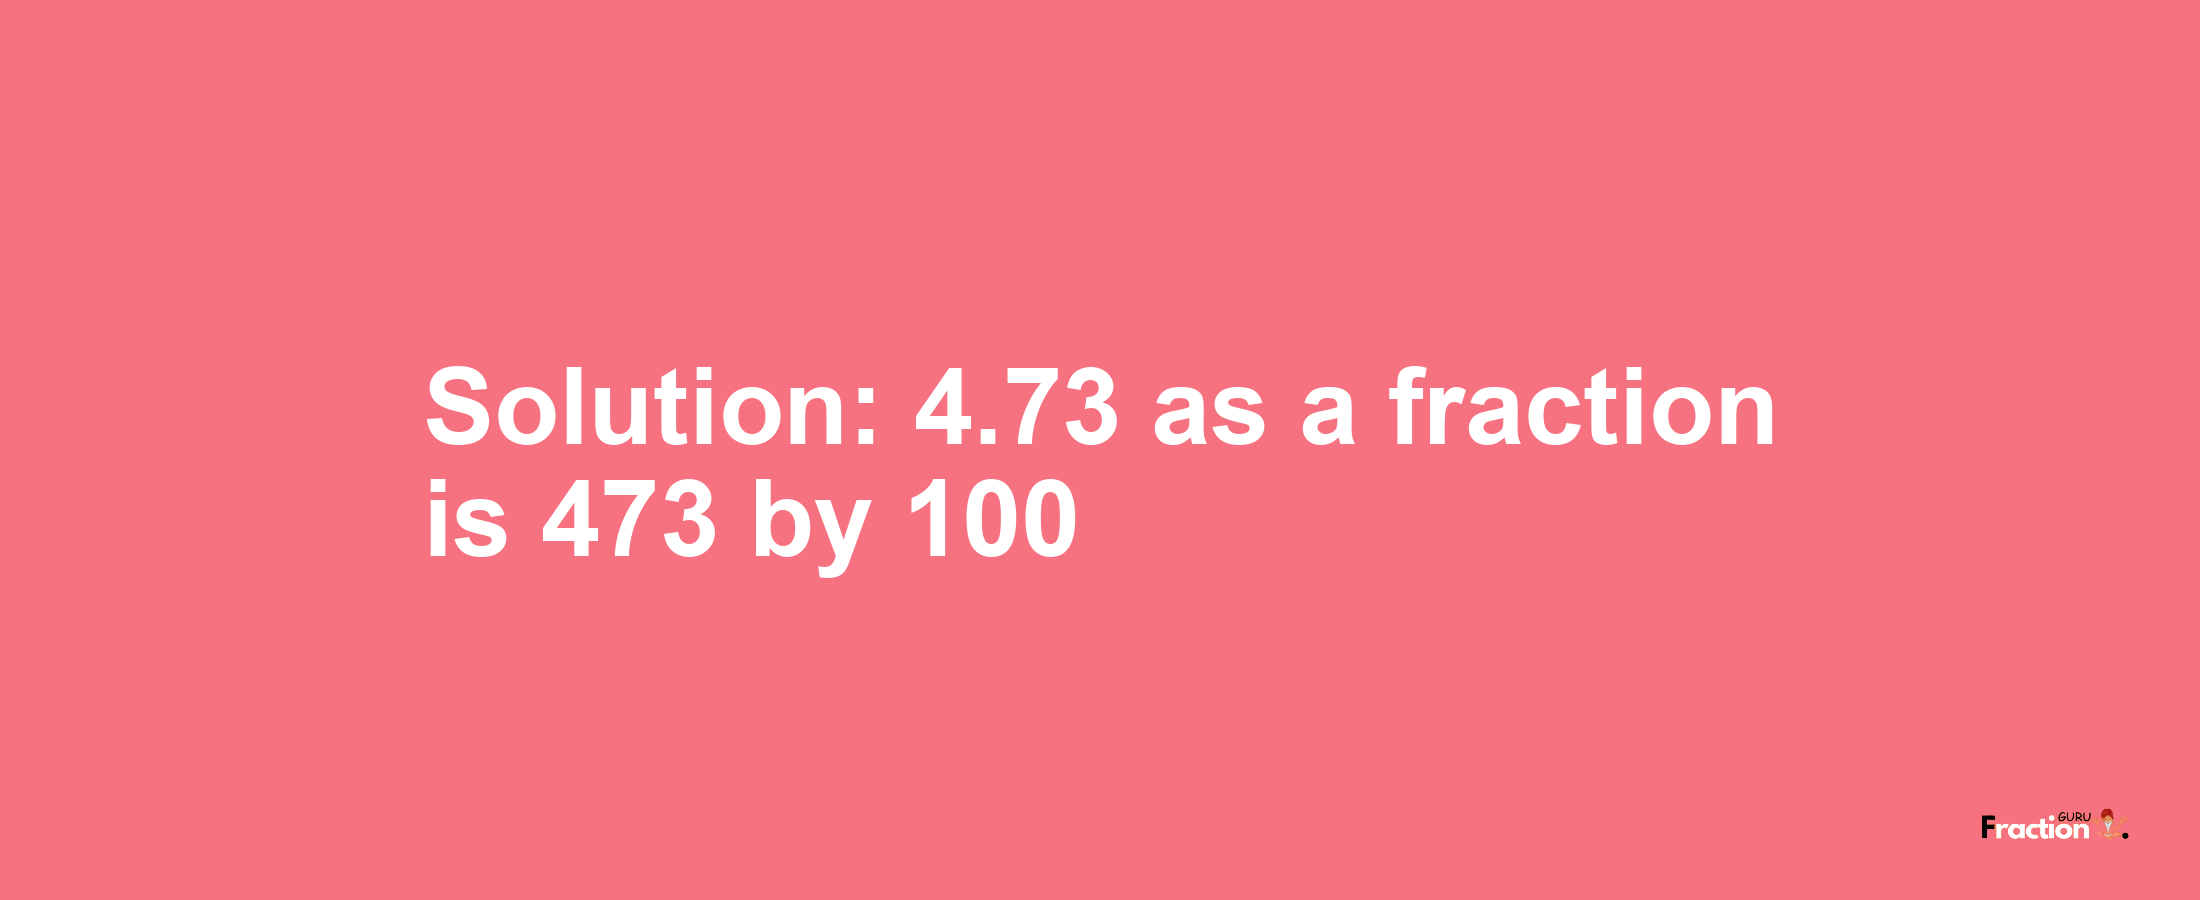 Solution:4.73 as a fraction is 473/100